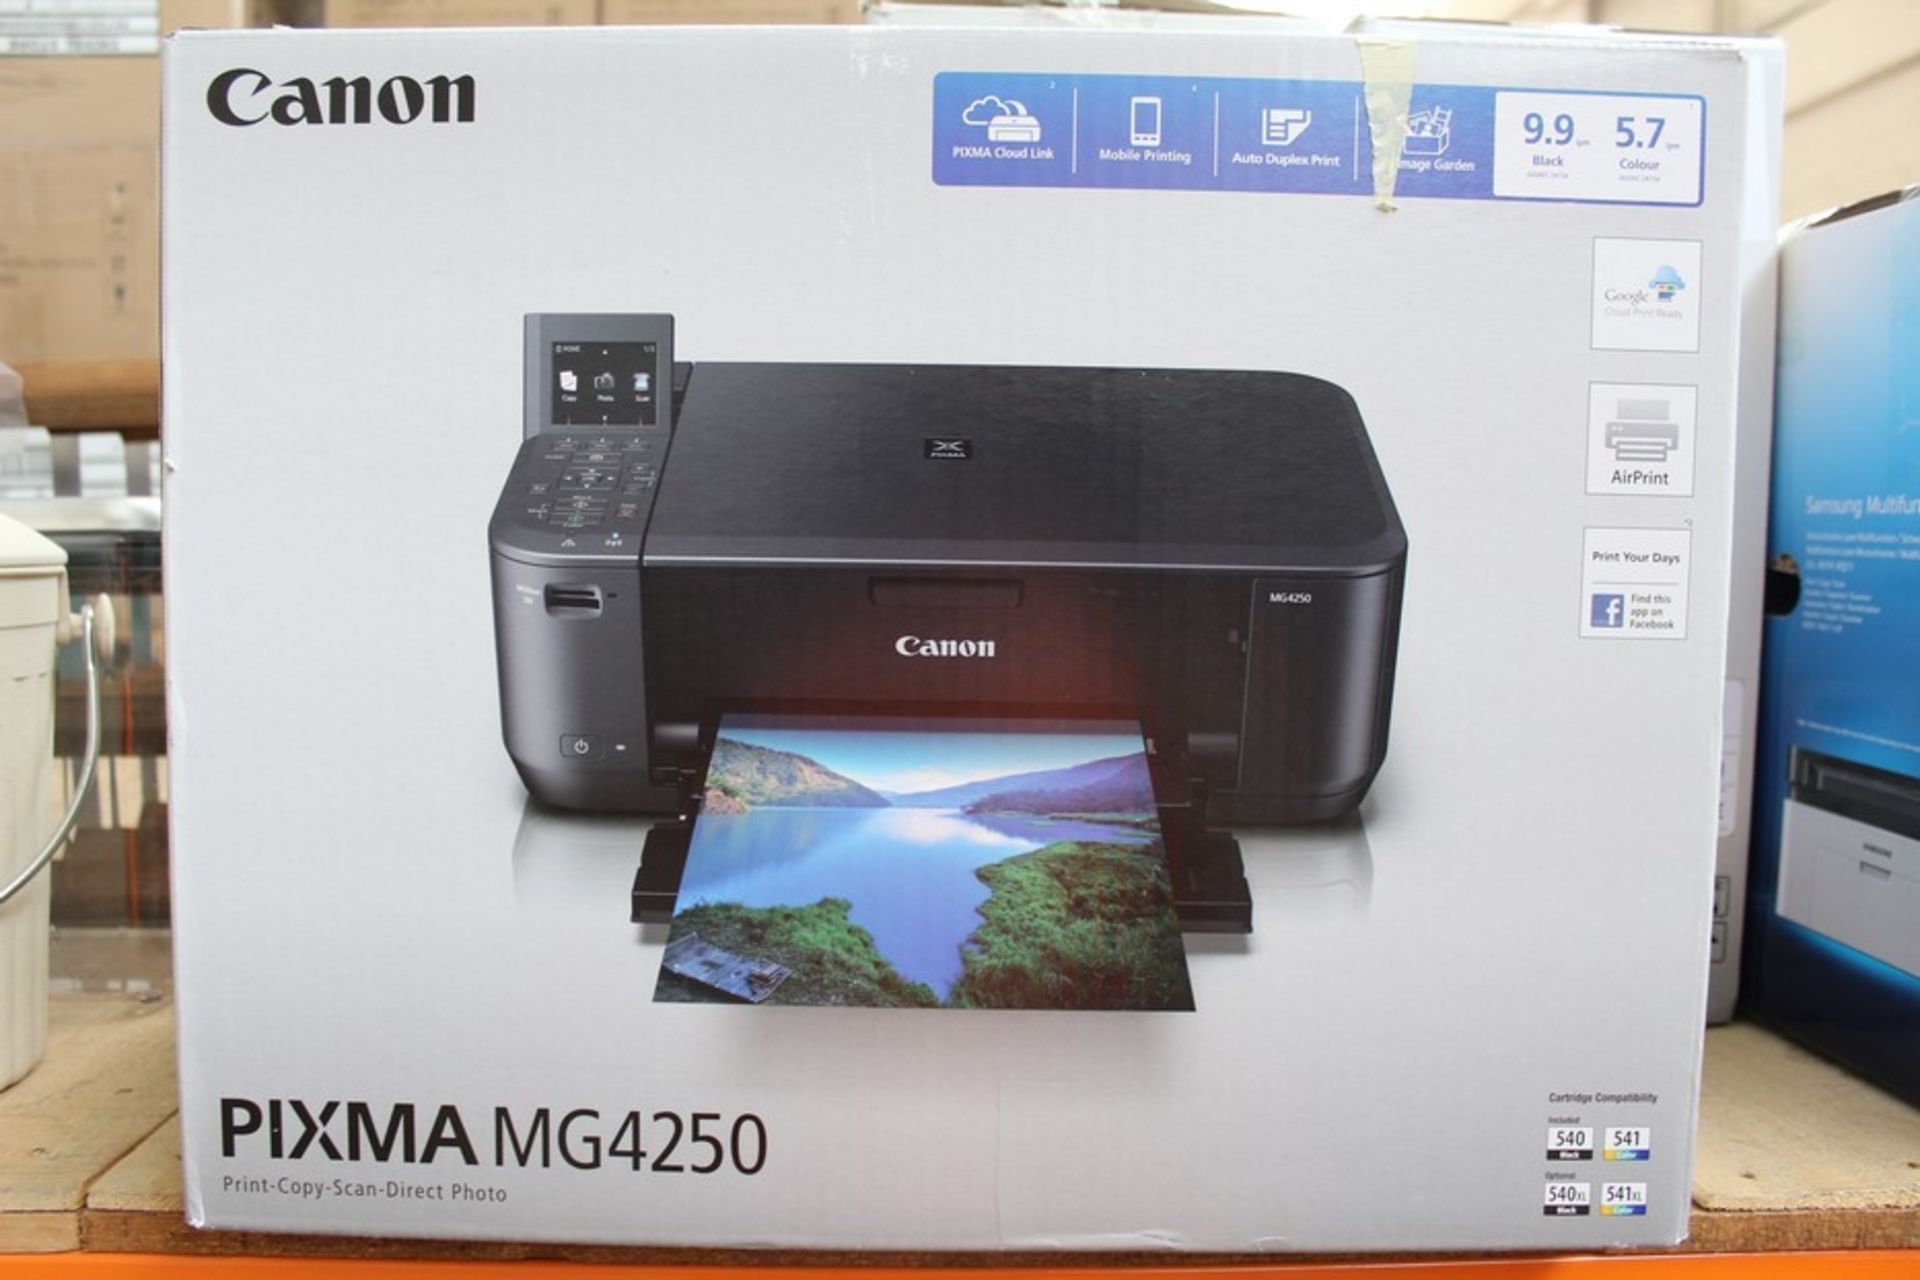 1 x BOXED CANON PIXMA MG4250 ALL IN ONE PRINTER SCANNER COPIER WITH WIFI (587069)  *PLEASE NOTE THAT